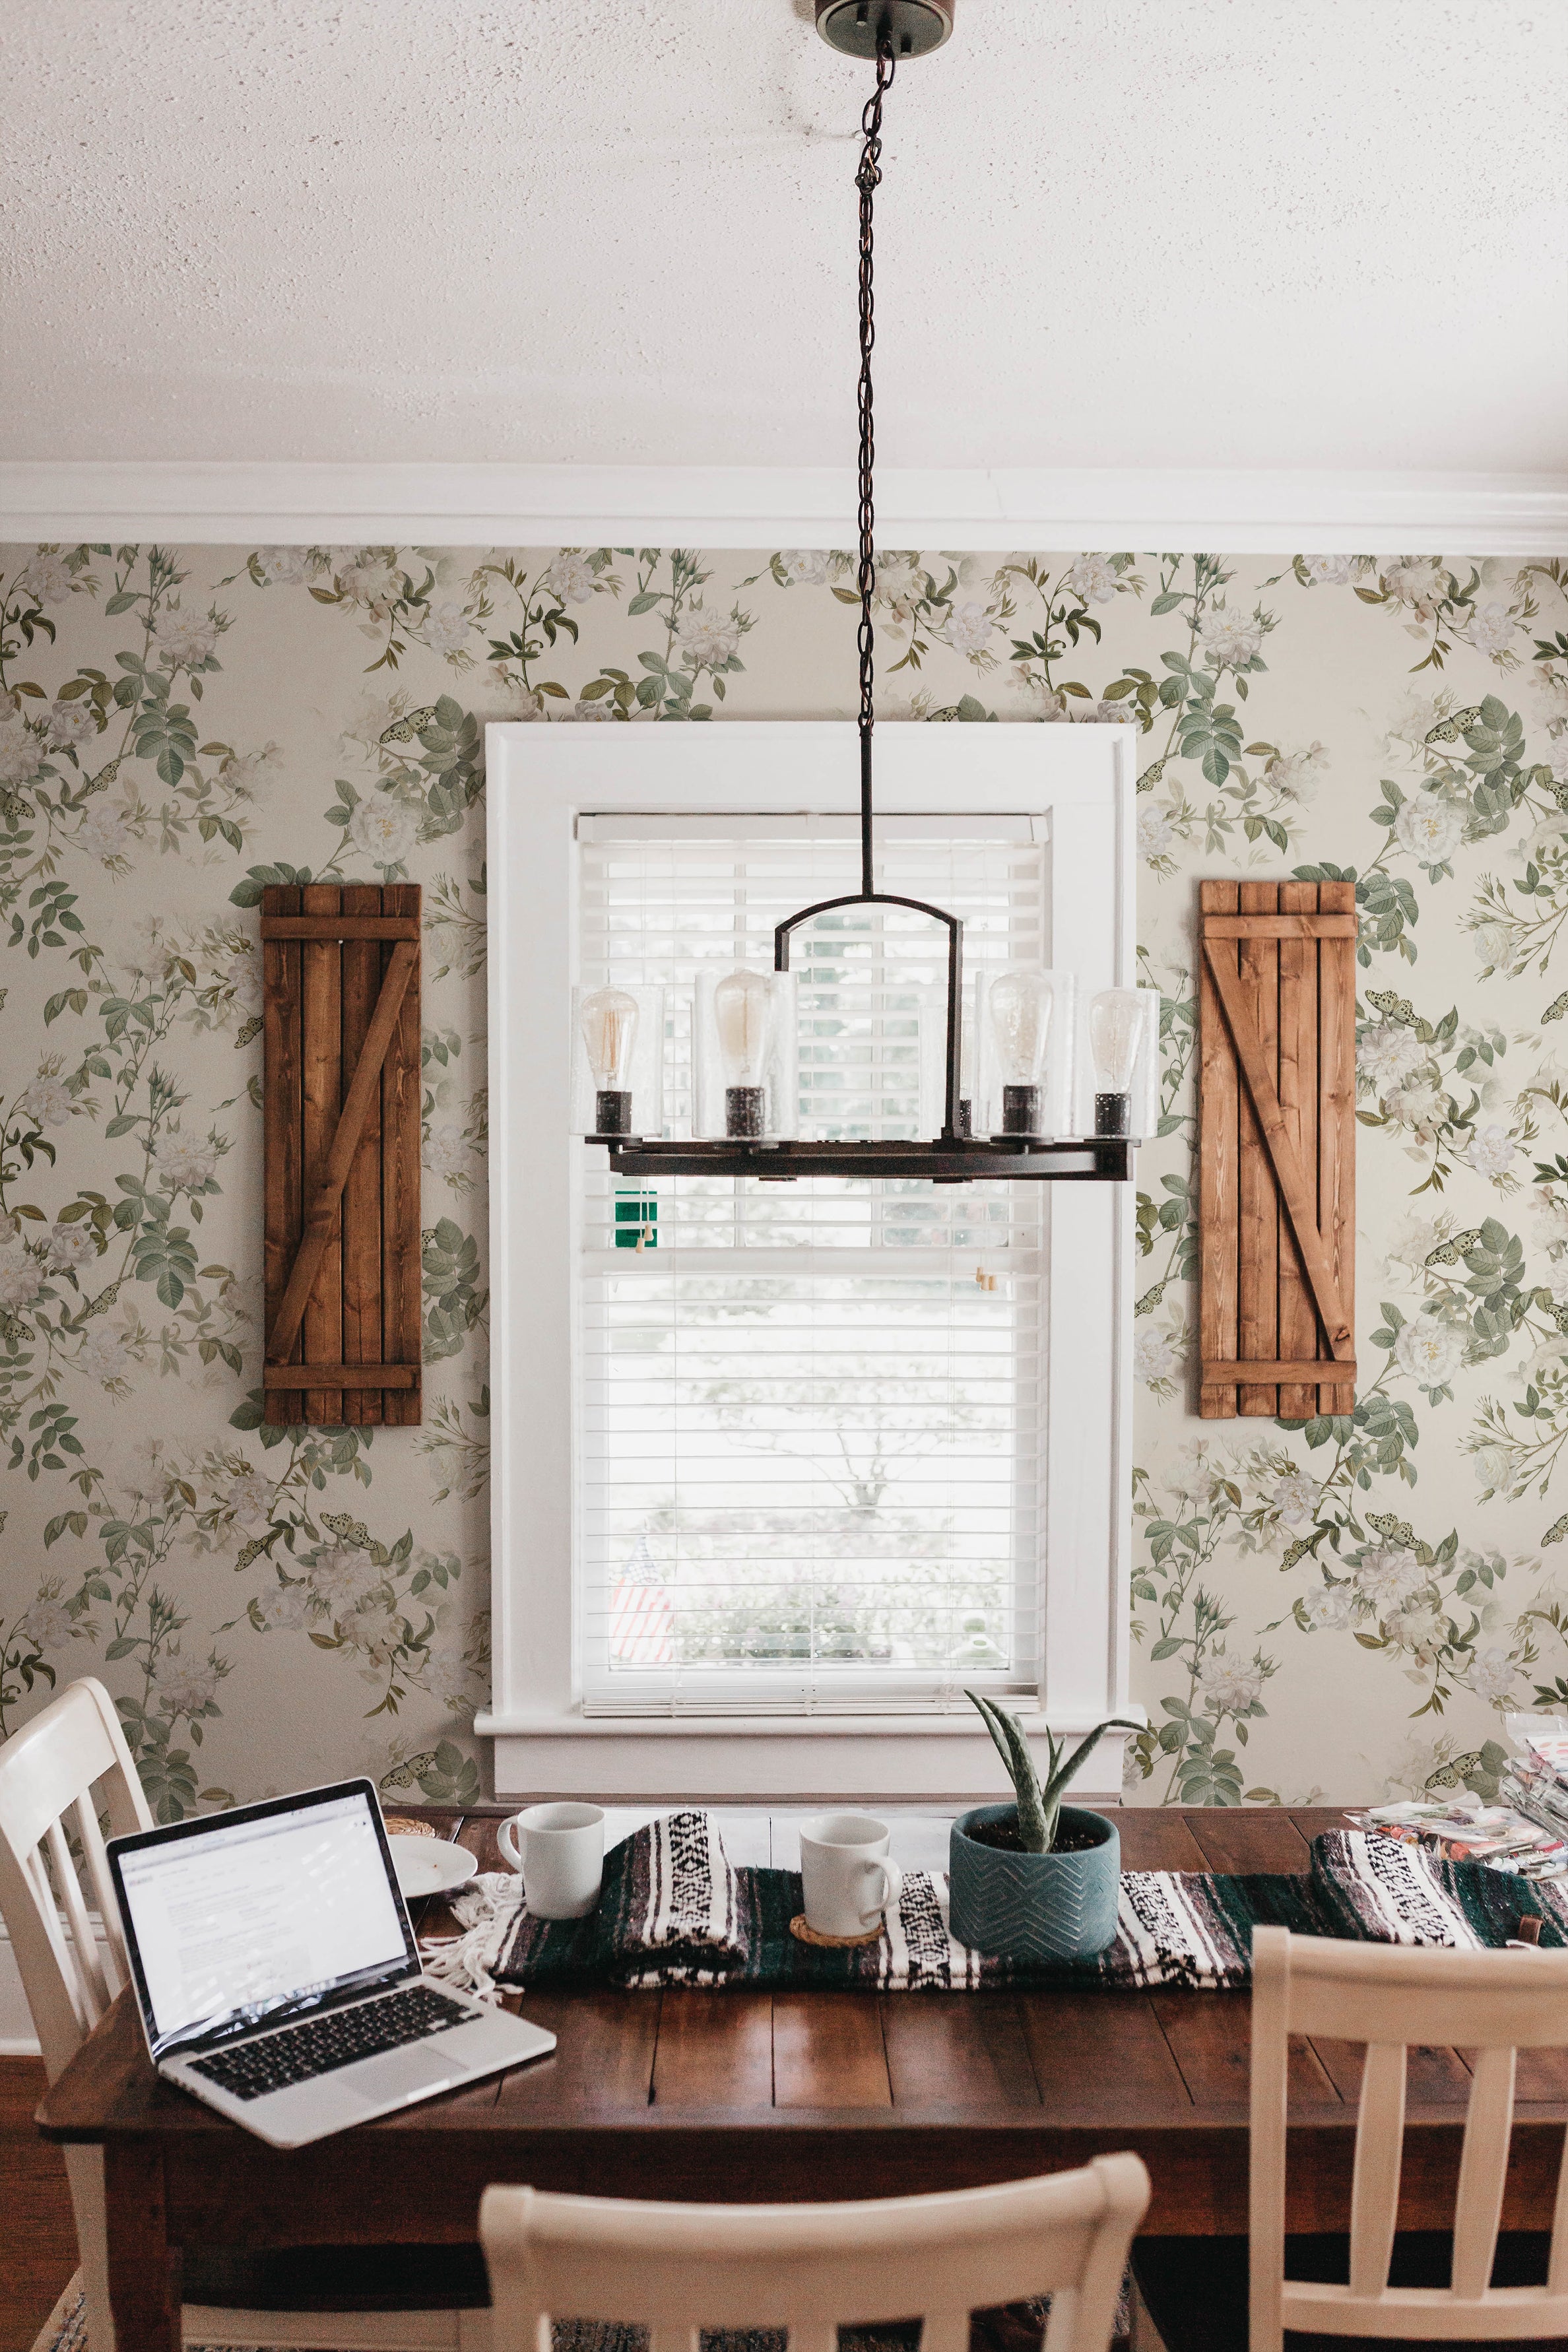 An elegant dining room with botanical wallpaper featuring large mint-green leaves and white flowers, a wooden table with a laptop and two mugs, wooden chairs, and a chandelier.